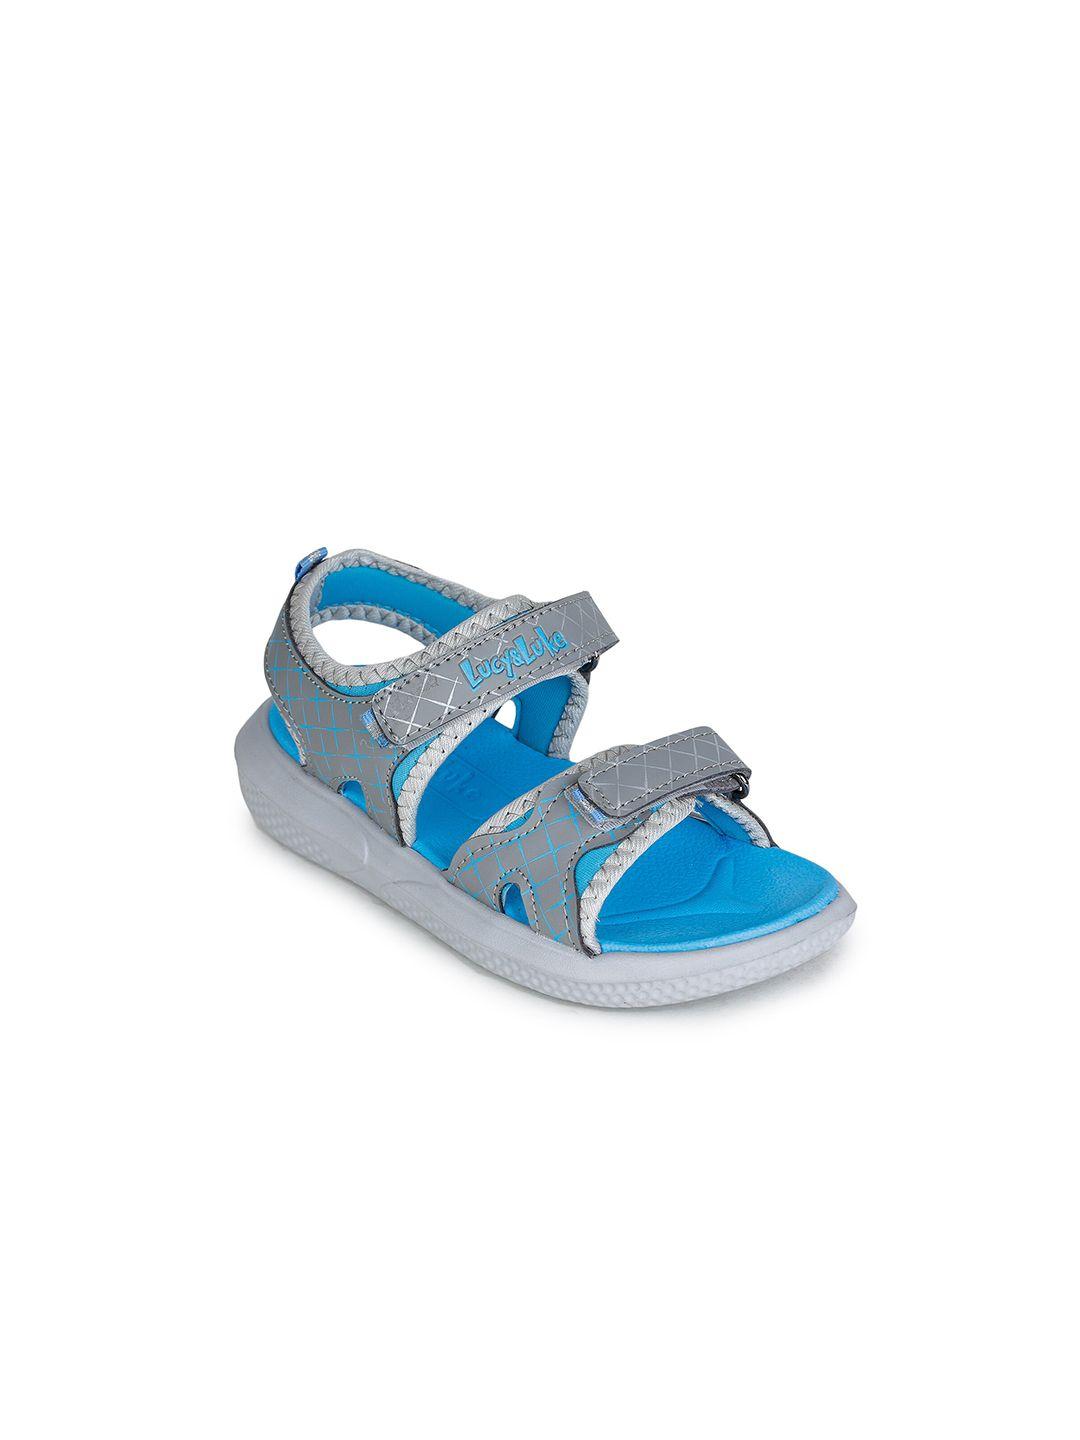 liberty kids grey & blue printed casual sports sandals